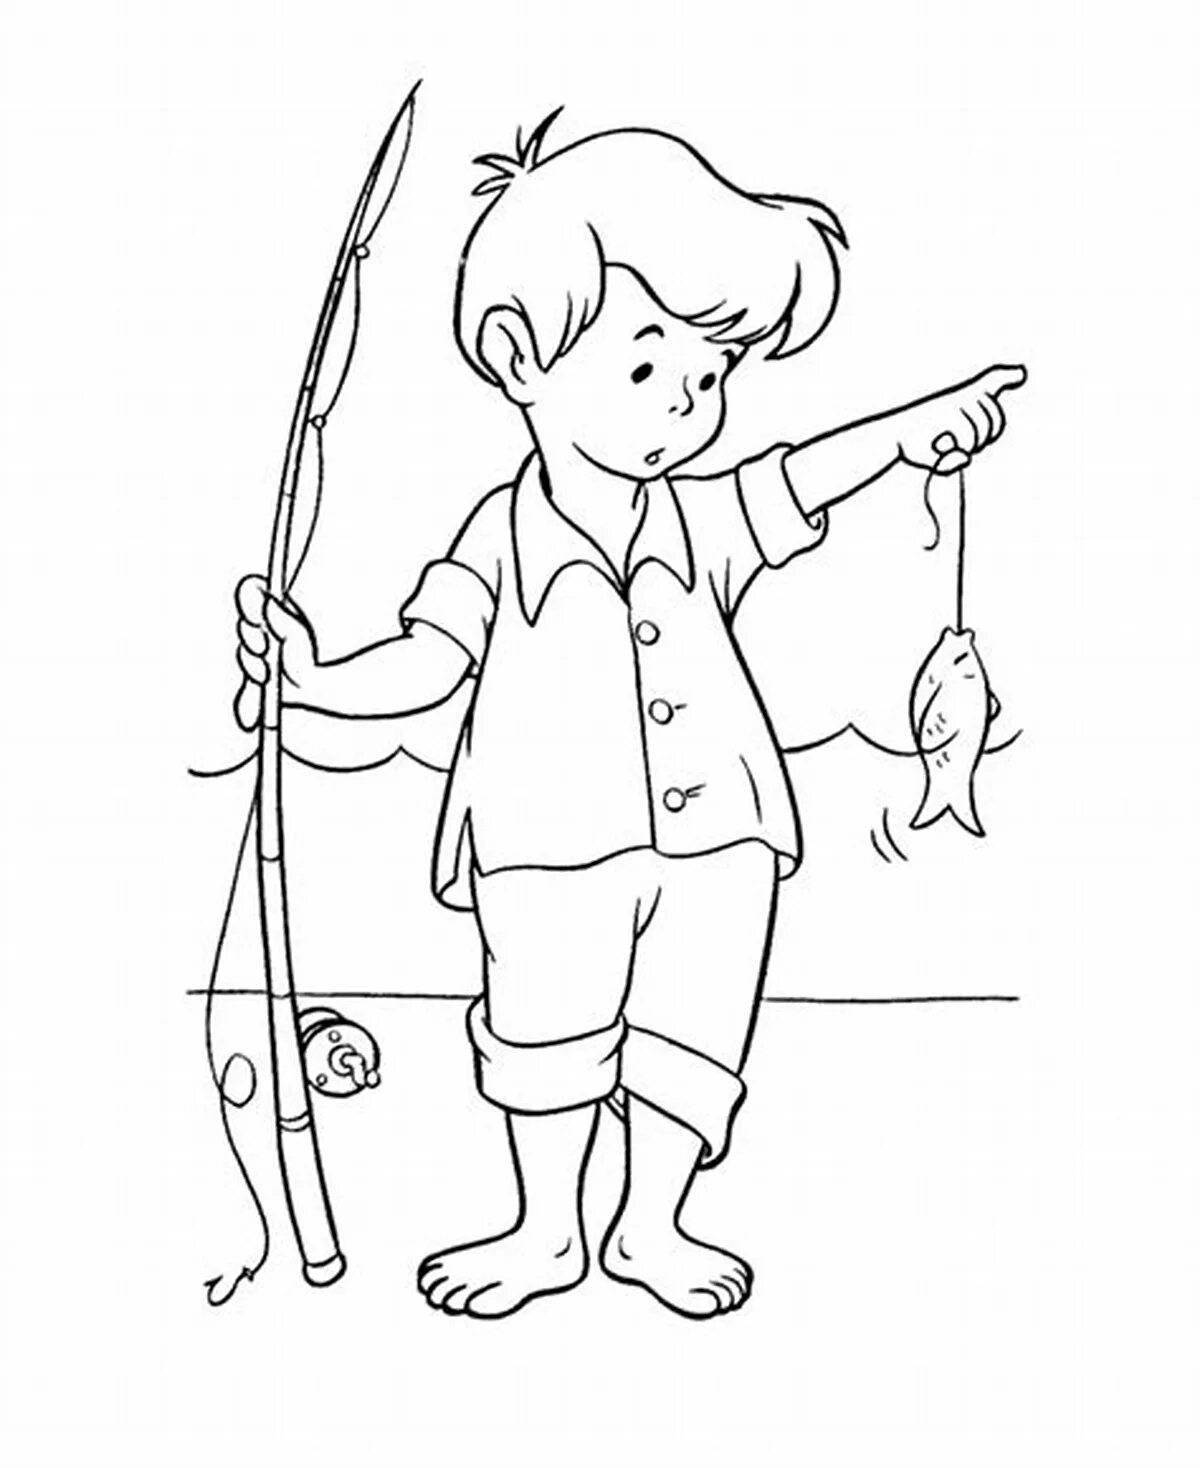 Gorgeous fisherman coloring pages for kids